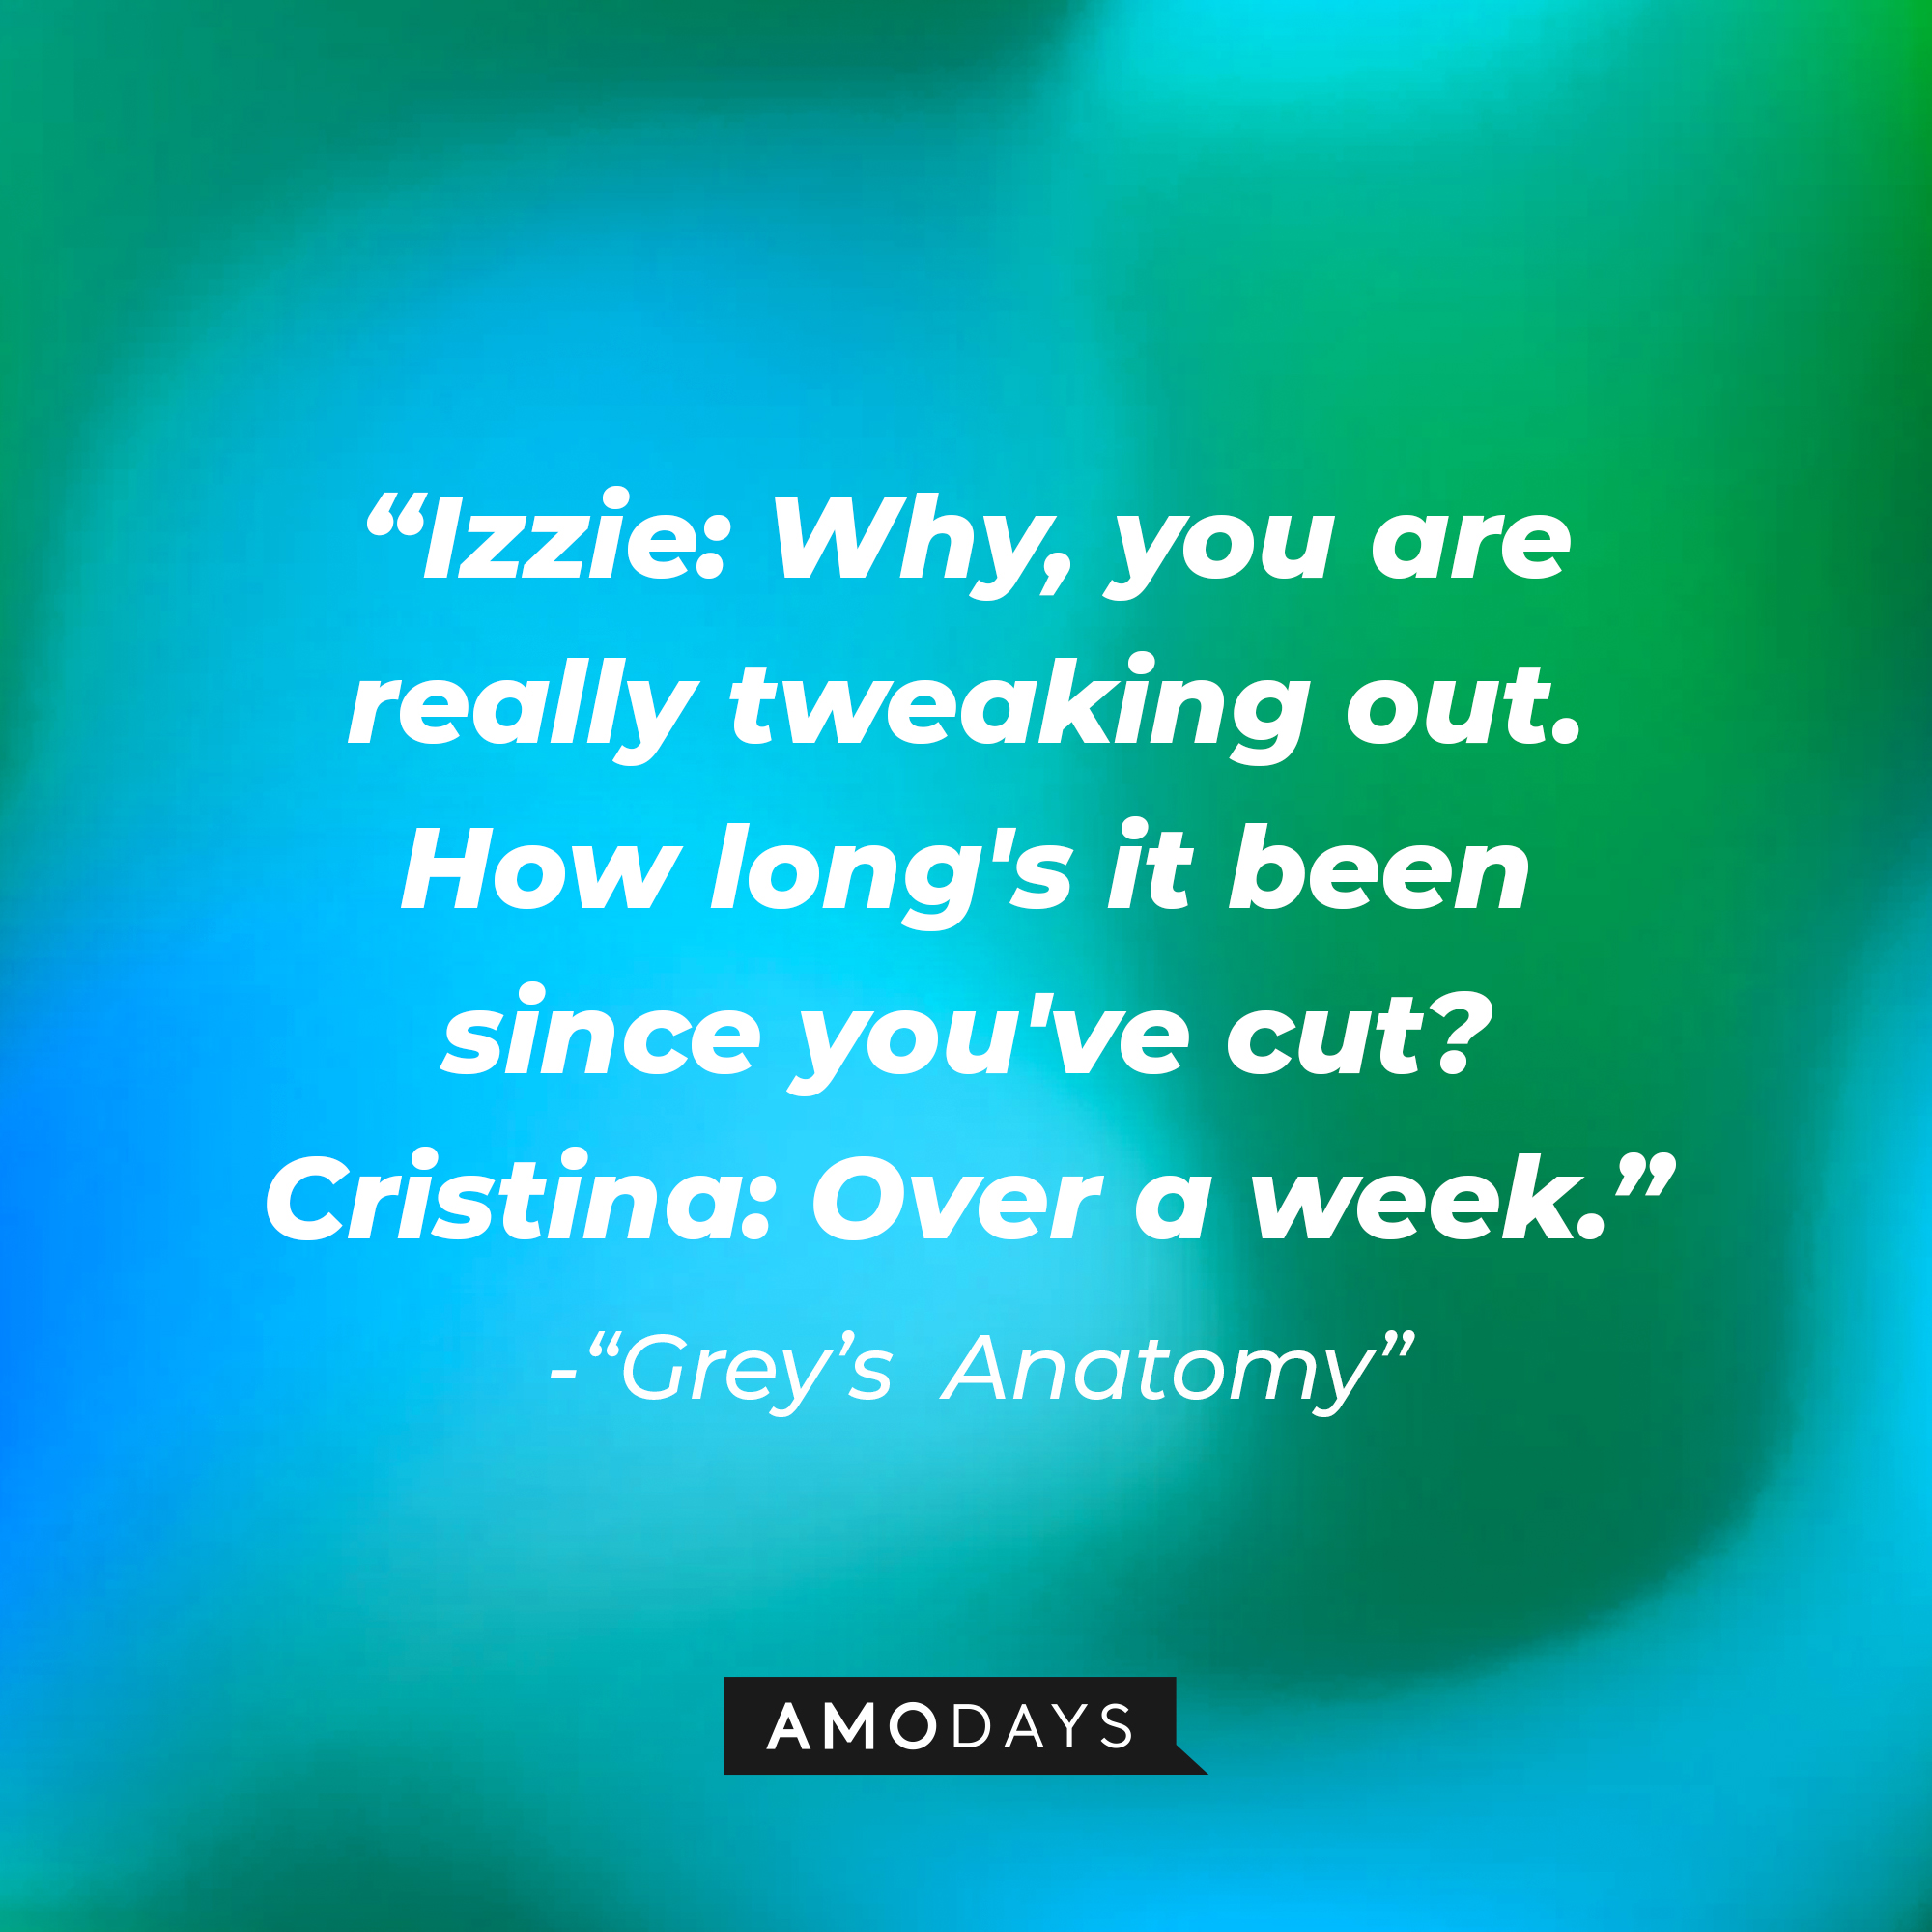 Izzie Stevens' quote: Why, you are realy tweaking out. How long's it been since you've cut?" Cristina: "Over a week." | Image: Amodays